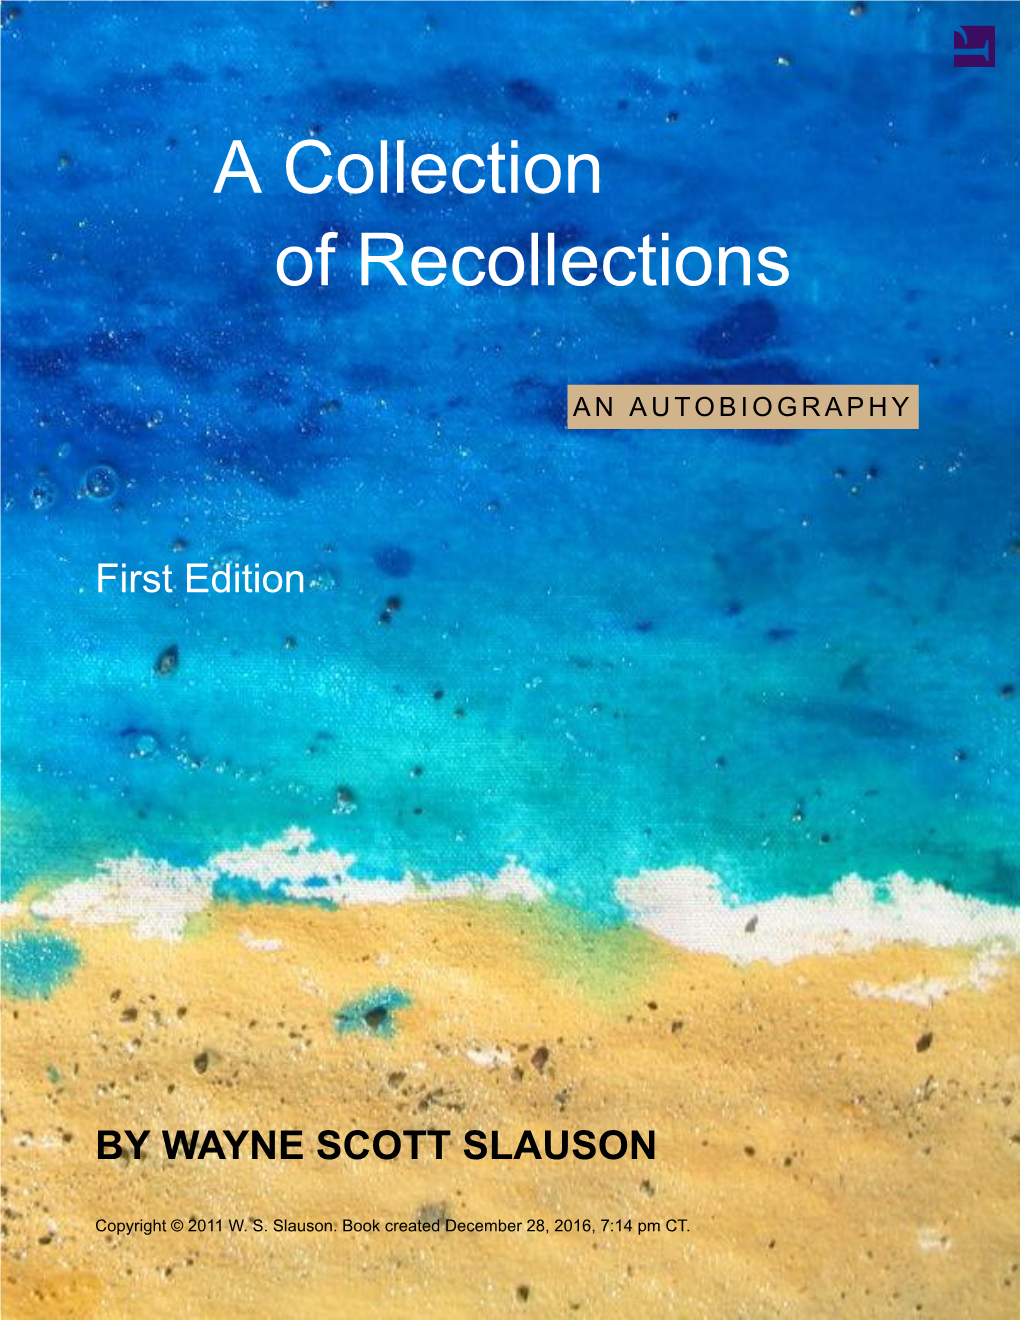 A Collection of Recollections